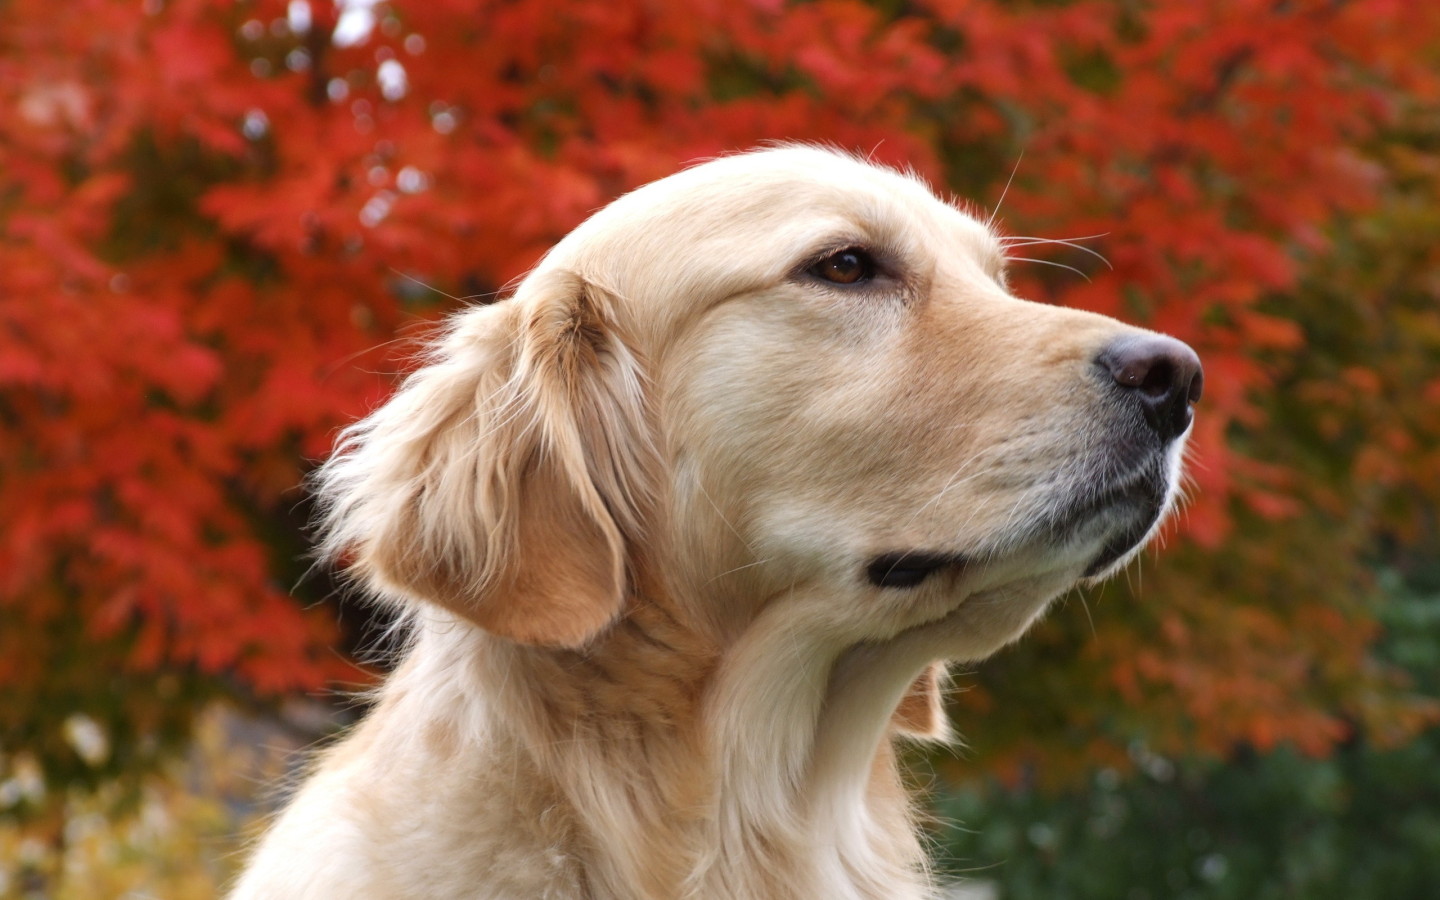 All Wallpapers: Beautiful Dog Hd Wallpapers